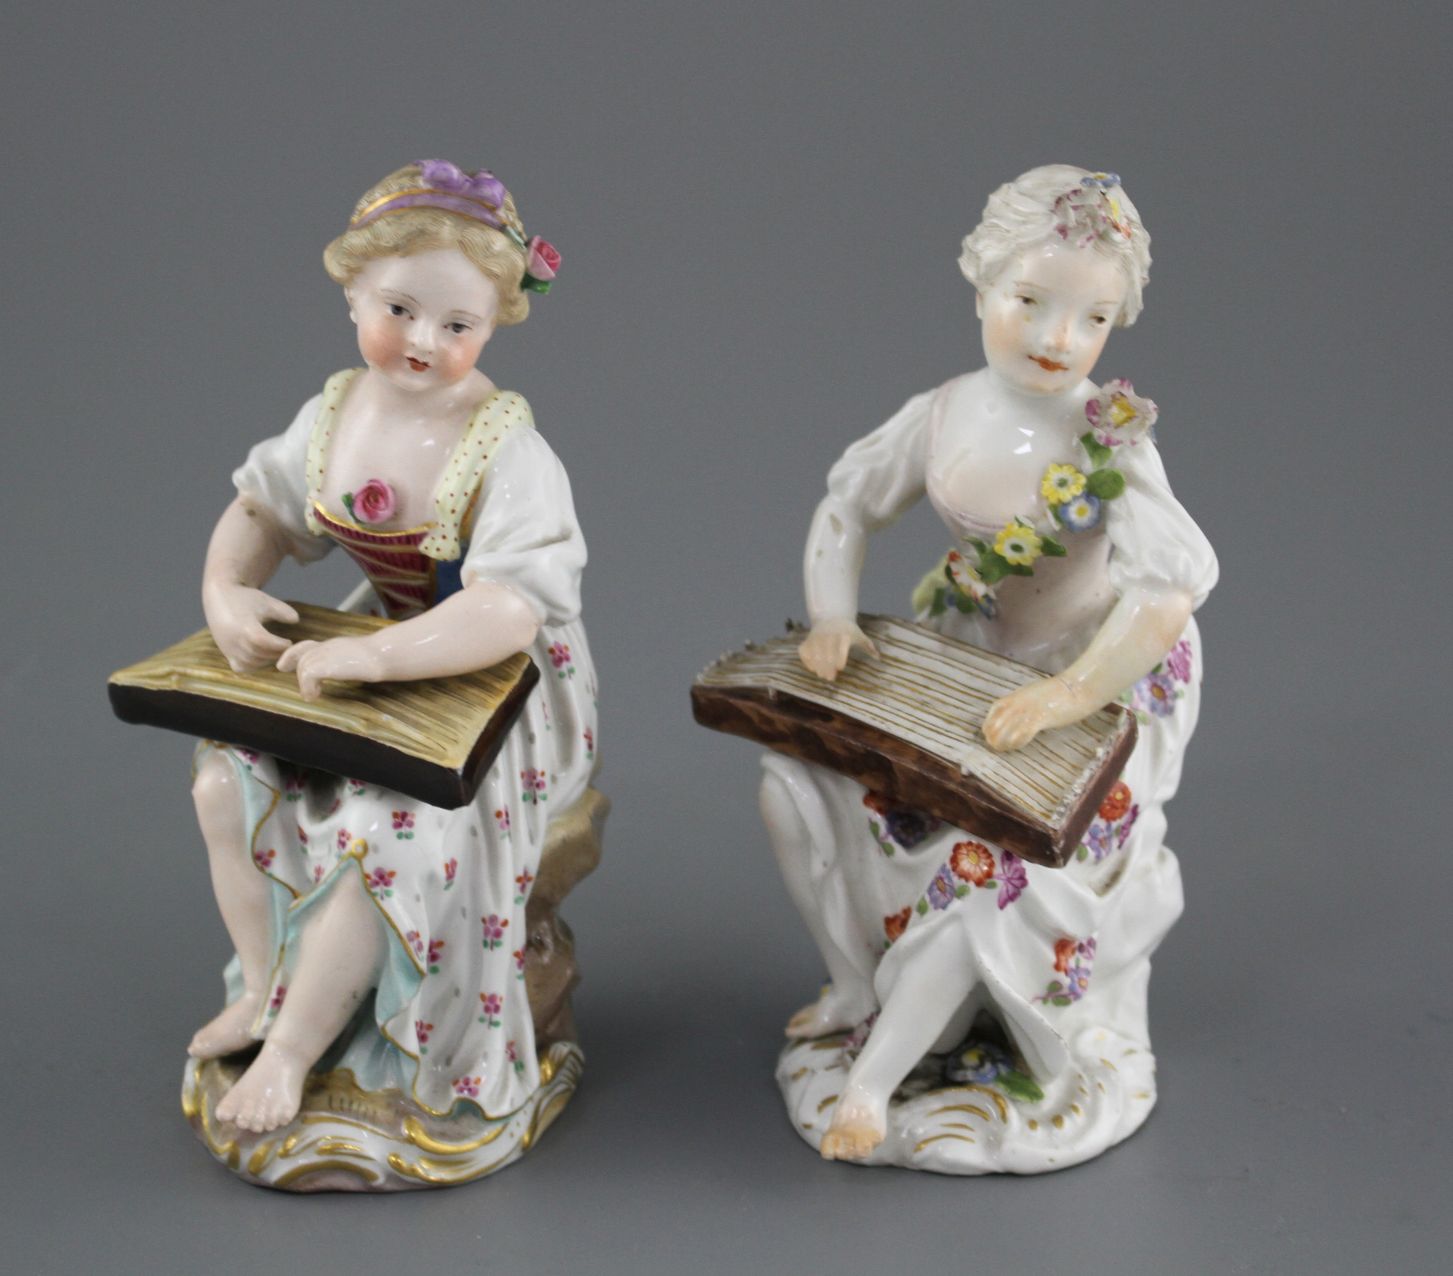 An 18th century Meissen figure of a girl playing a zither and a 19th century Meissen figure of a